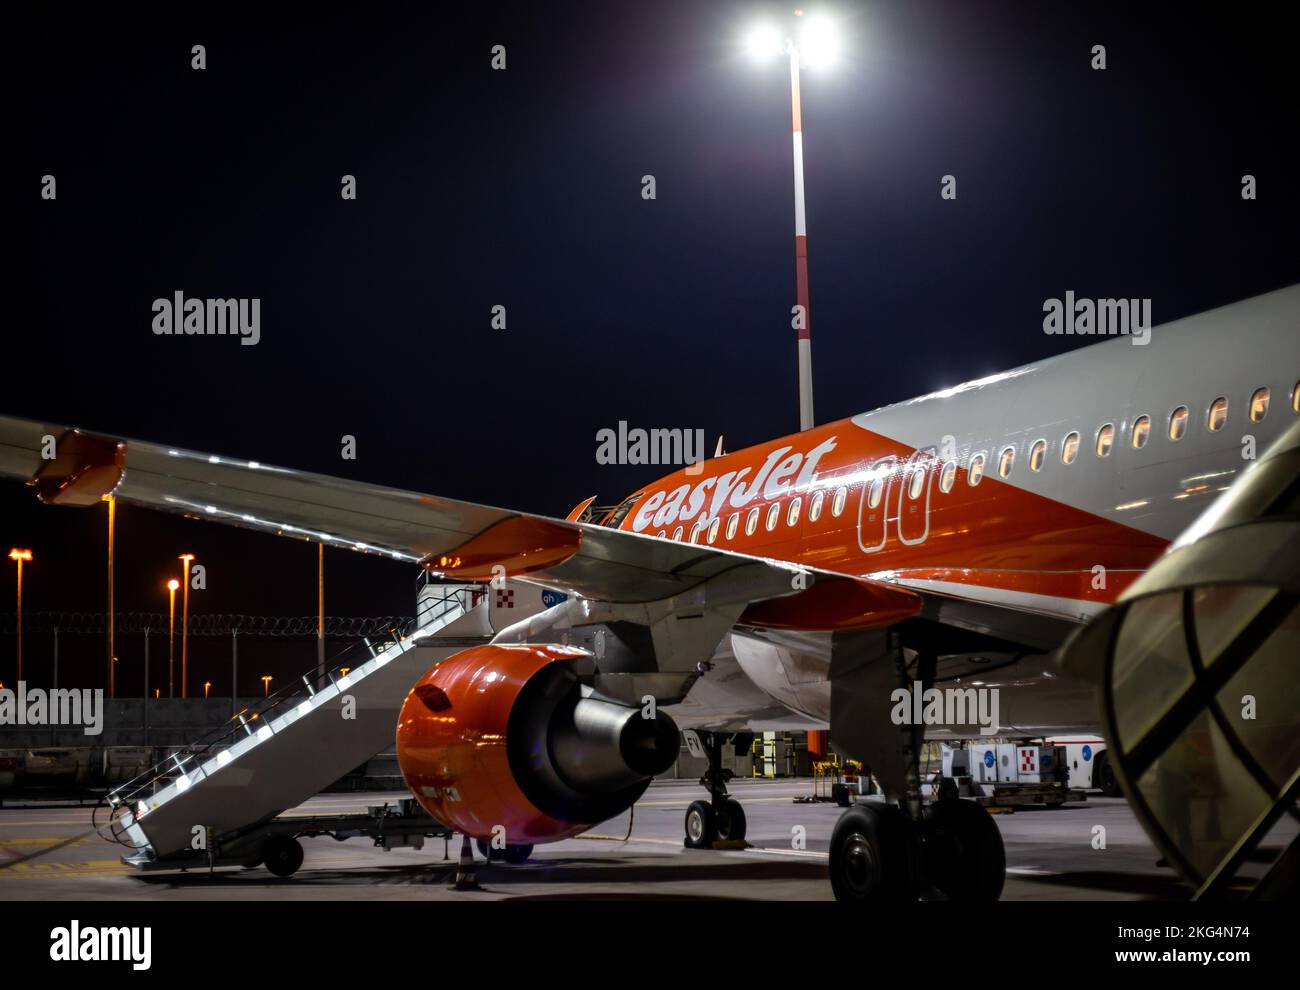 A smart easy jet at night on the tarmac at Venice Marco Polo Airport waiting for passengers to embark from  their business and holidays trips. Stock Photo